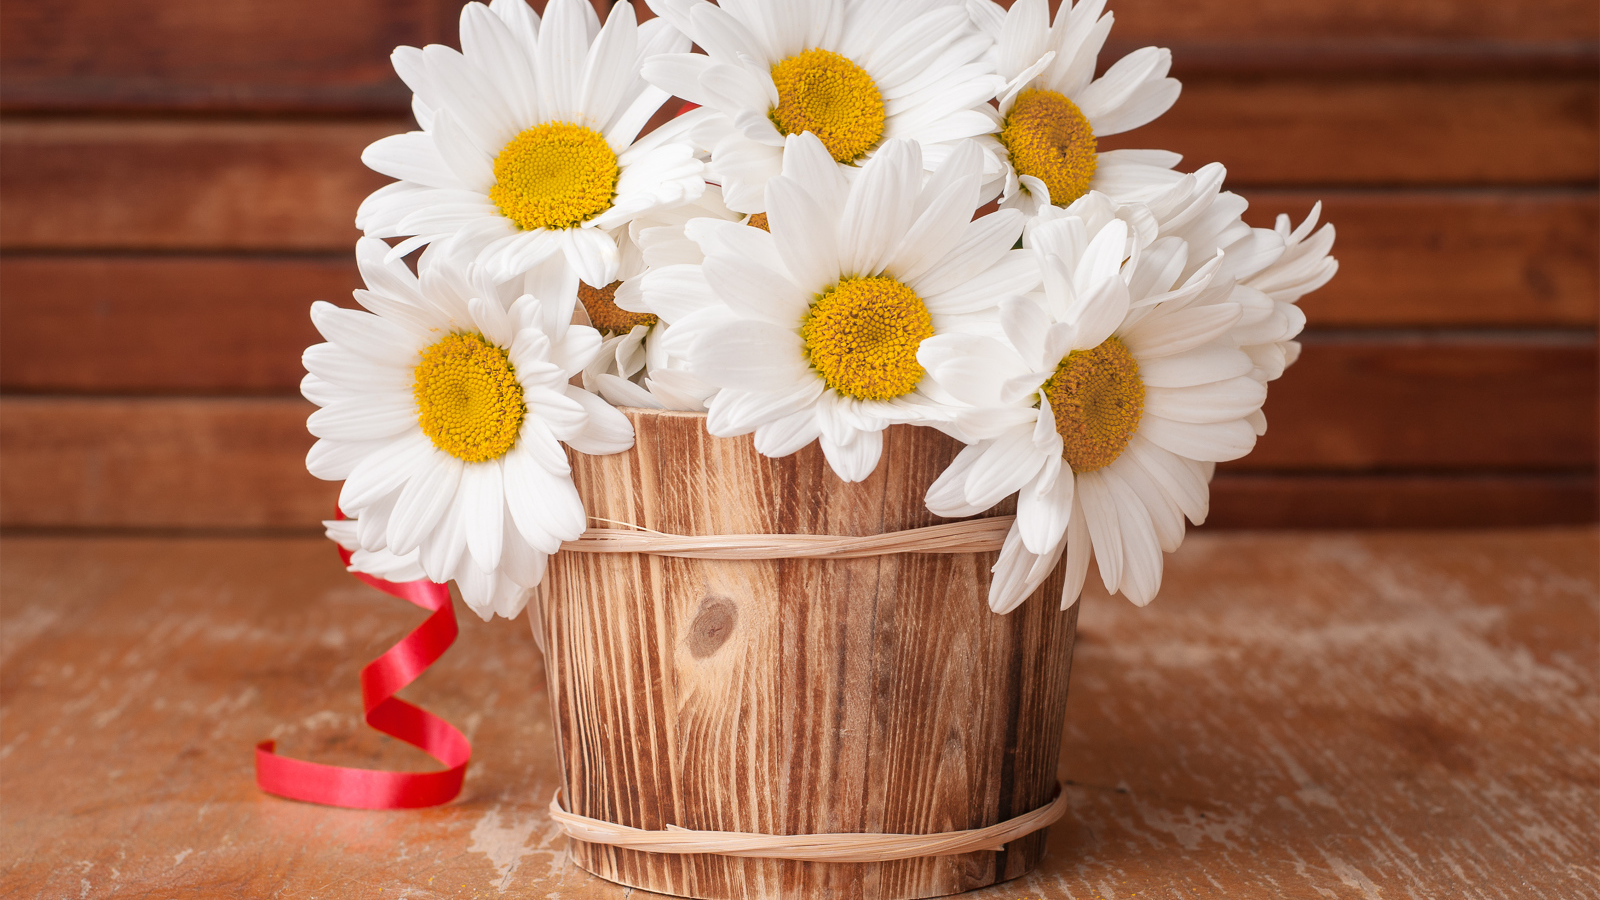 A bouquet of large white daisies in a wooden vase